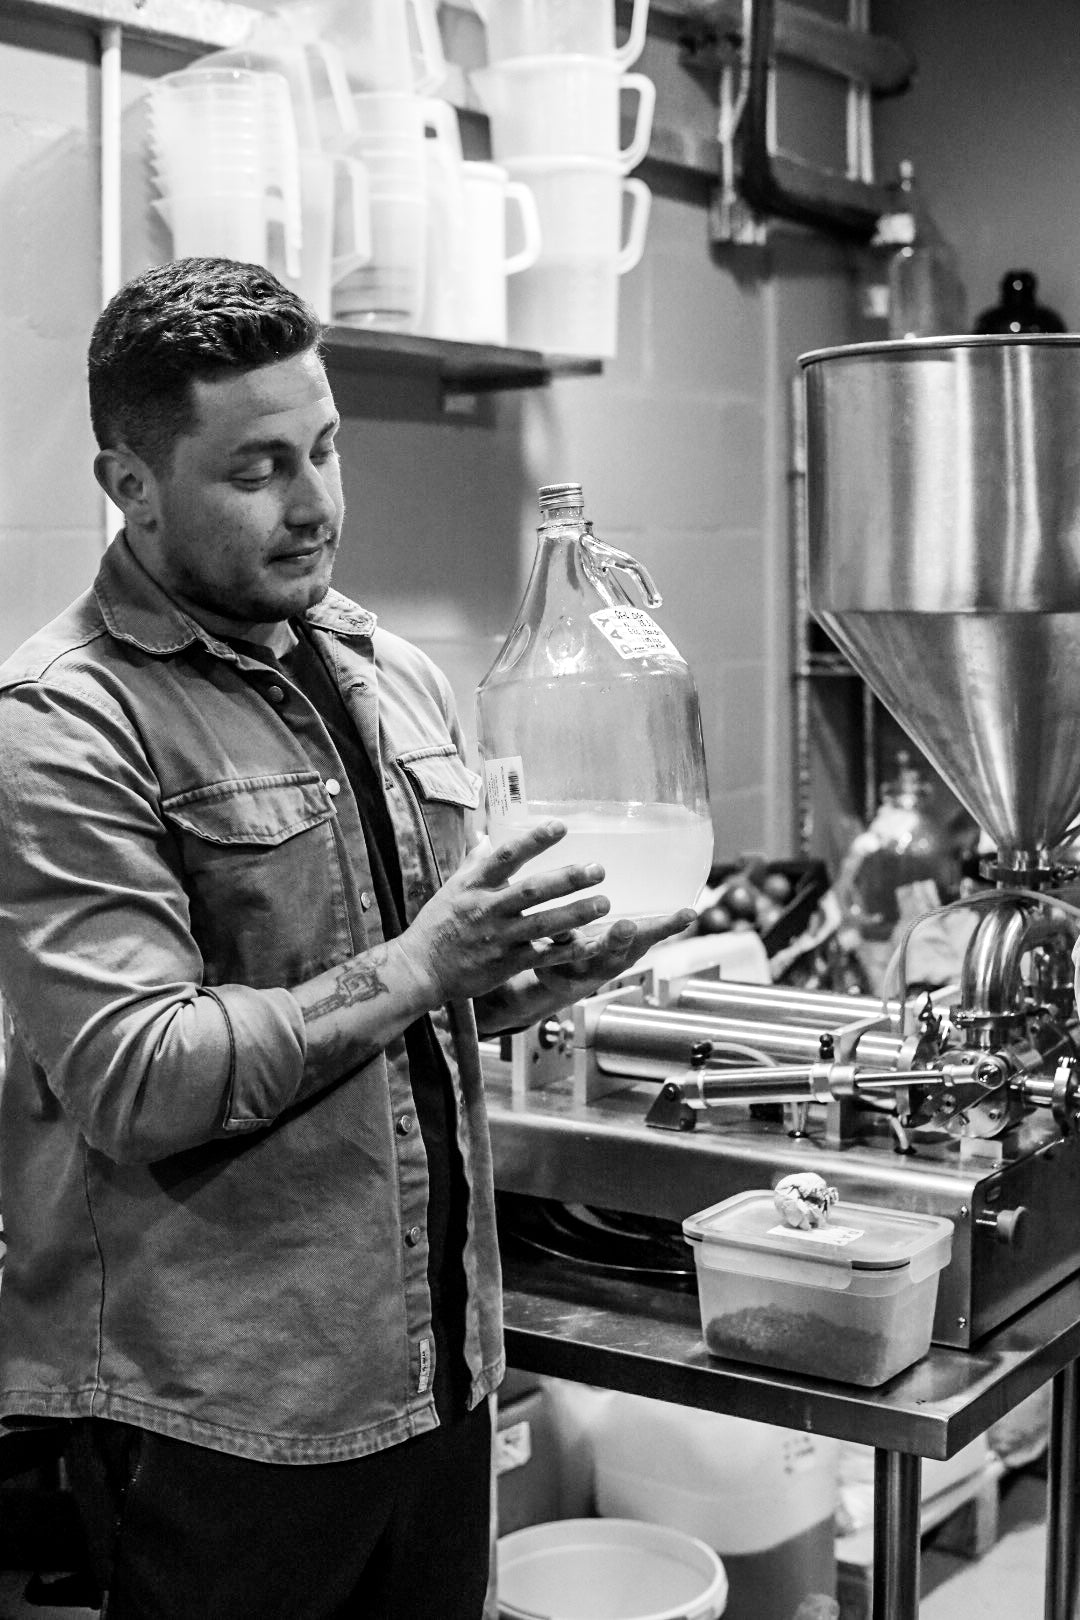 Head Distiller and owner of Essex Spirits Company, Zane, during a Tours & Tastings event at the Essex Distillery